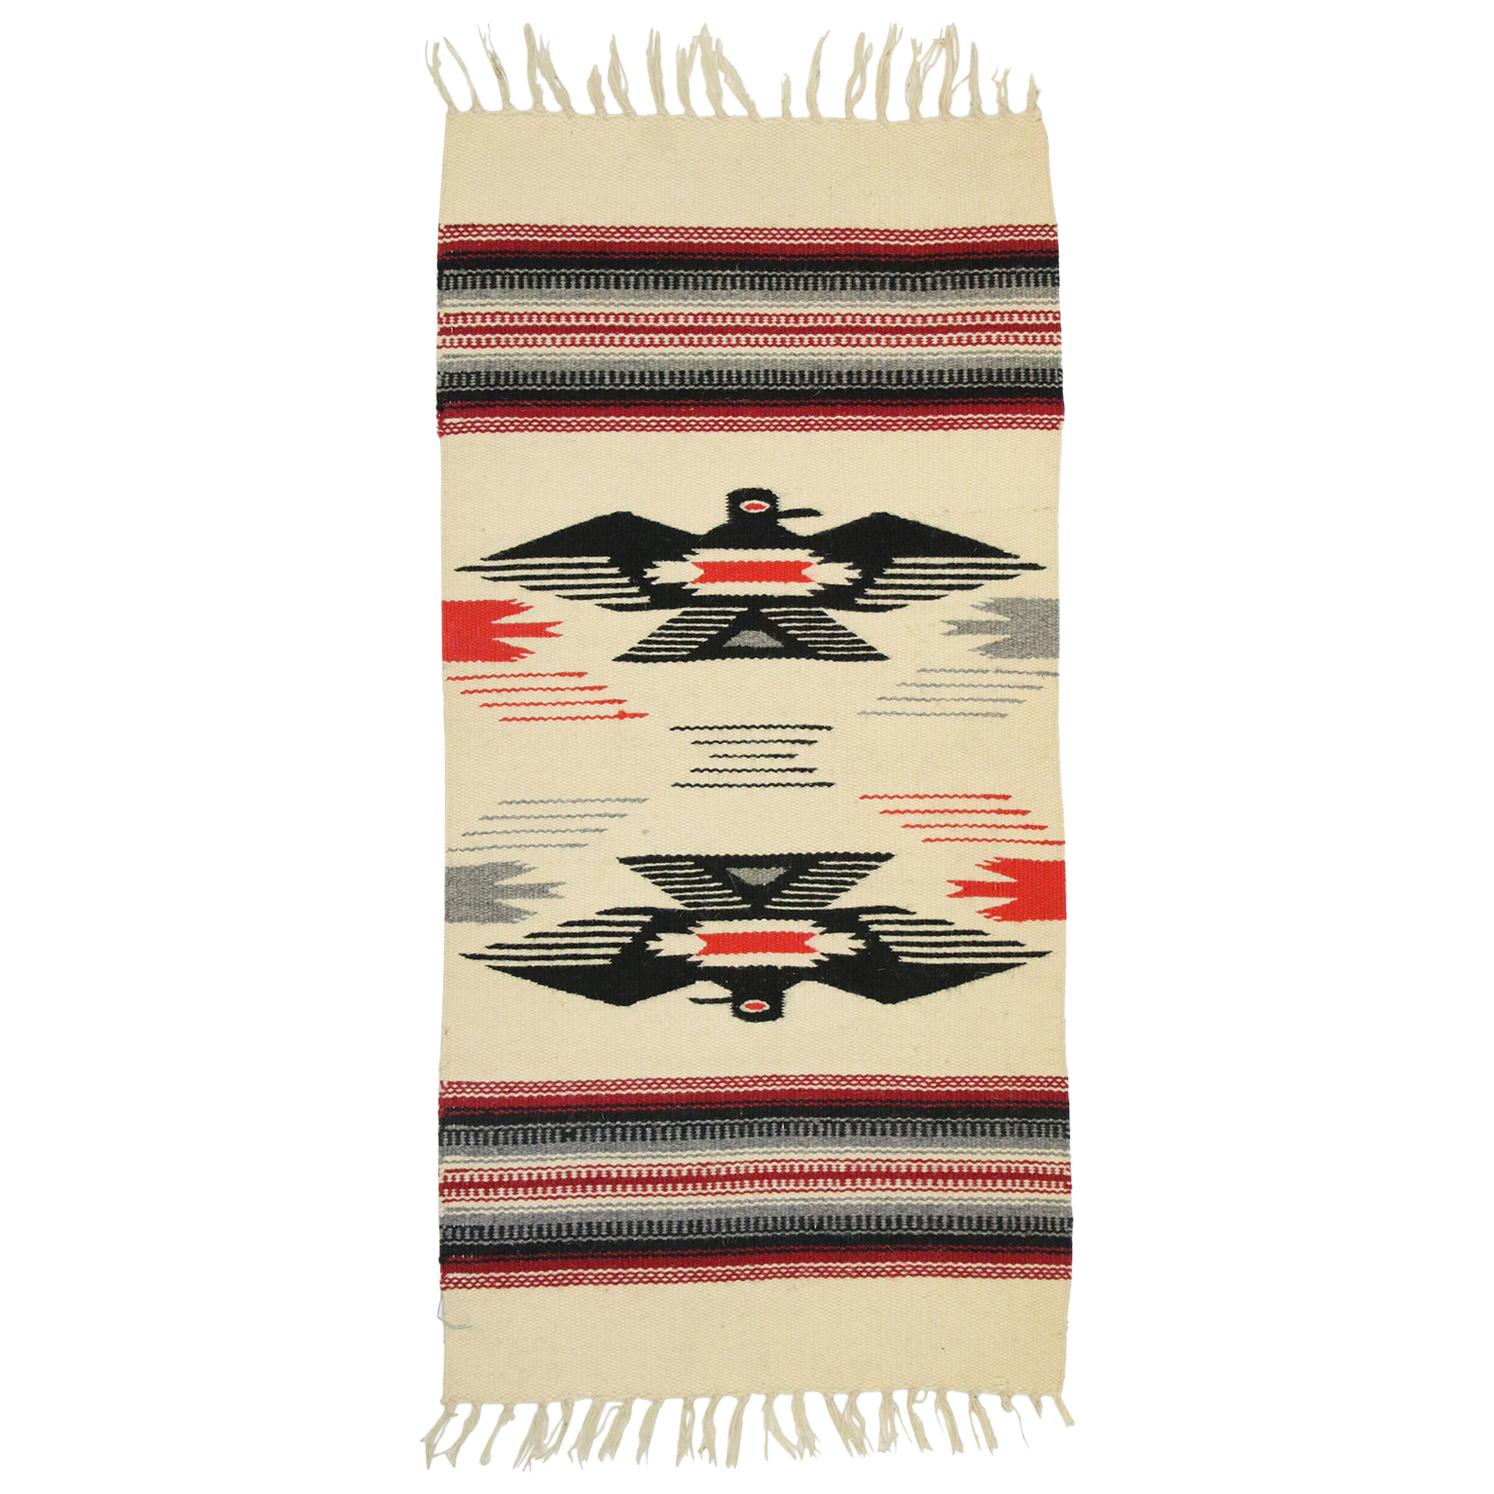 Vintage Mexican Throw Blanket Kilim Accent Rug with Navajo Two Grey Hills Style